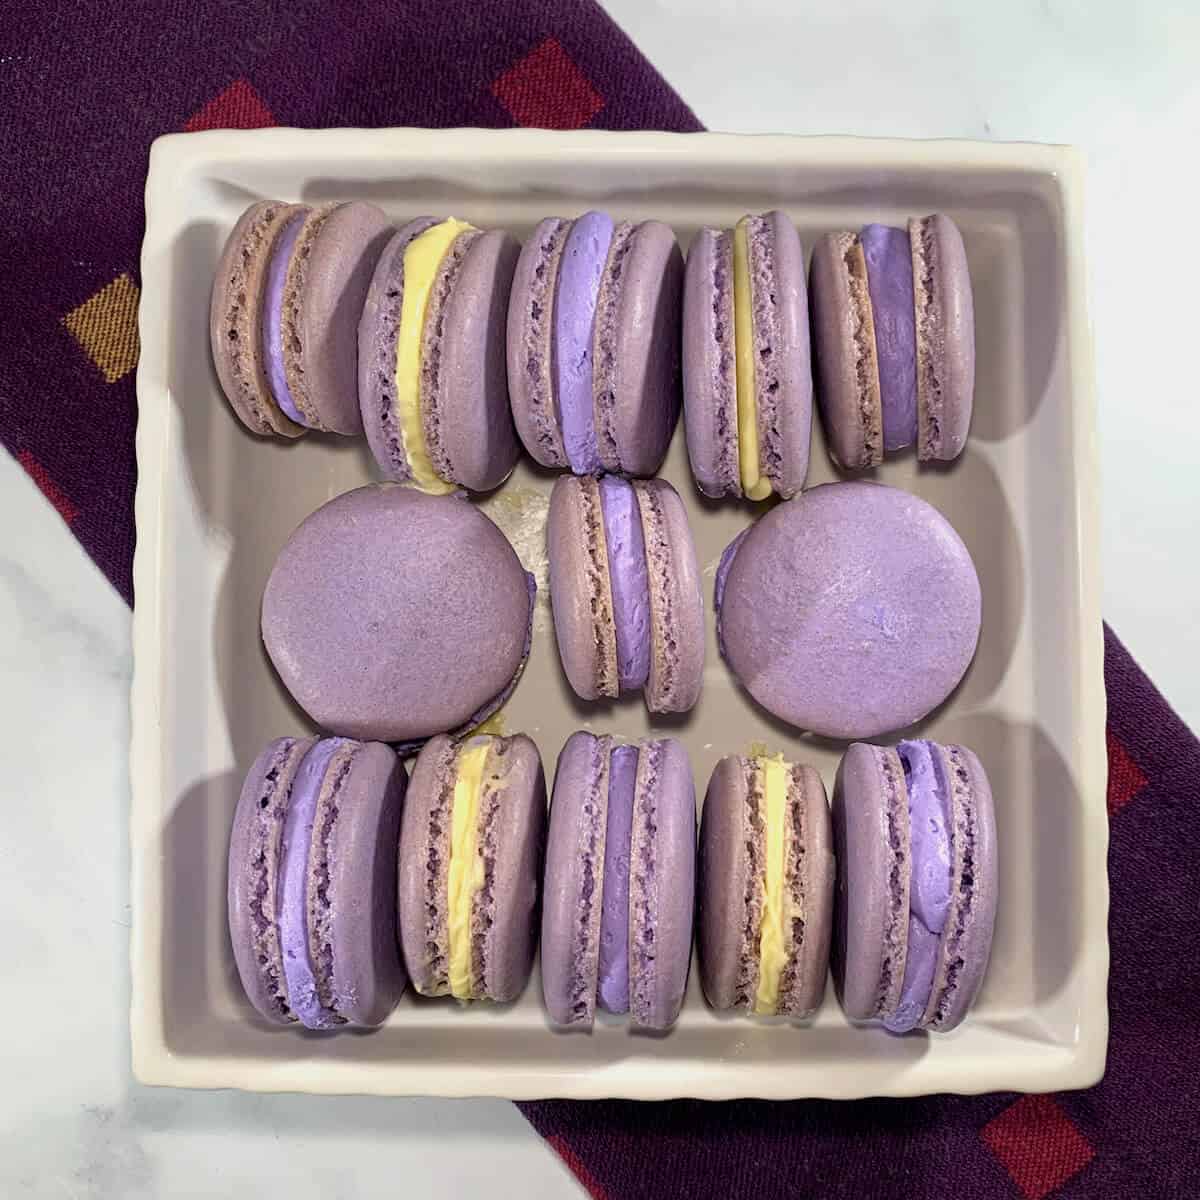 French Macarons with purple buttercream & lemon curd laying sideways in a dish on a purple towel from overhead